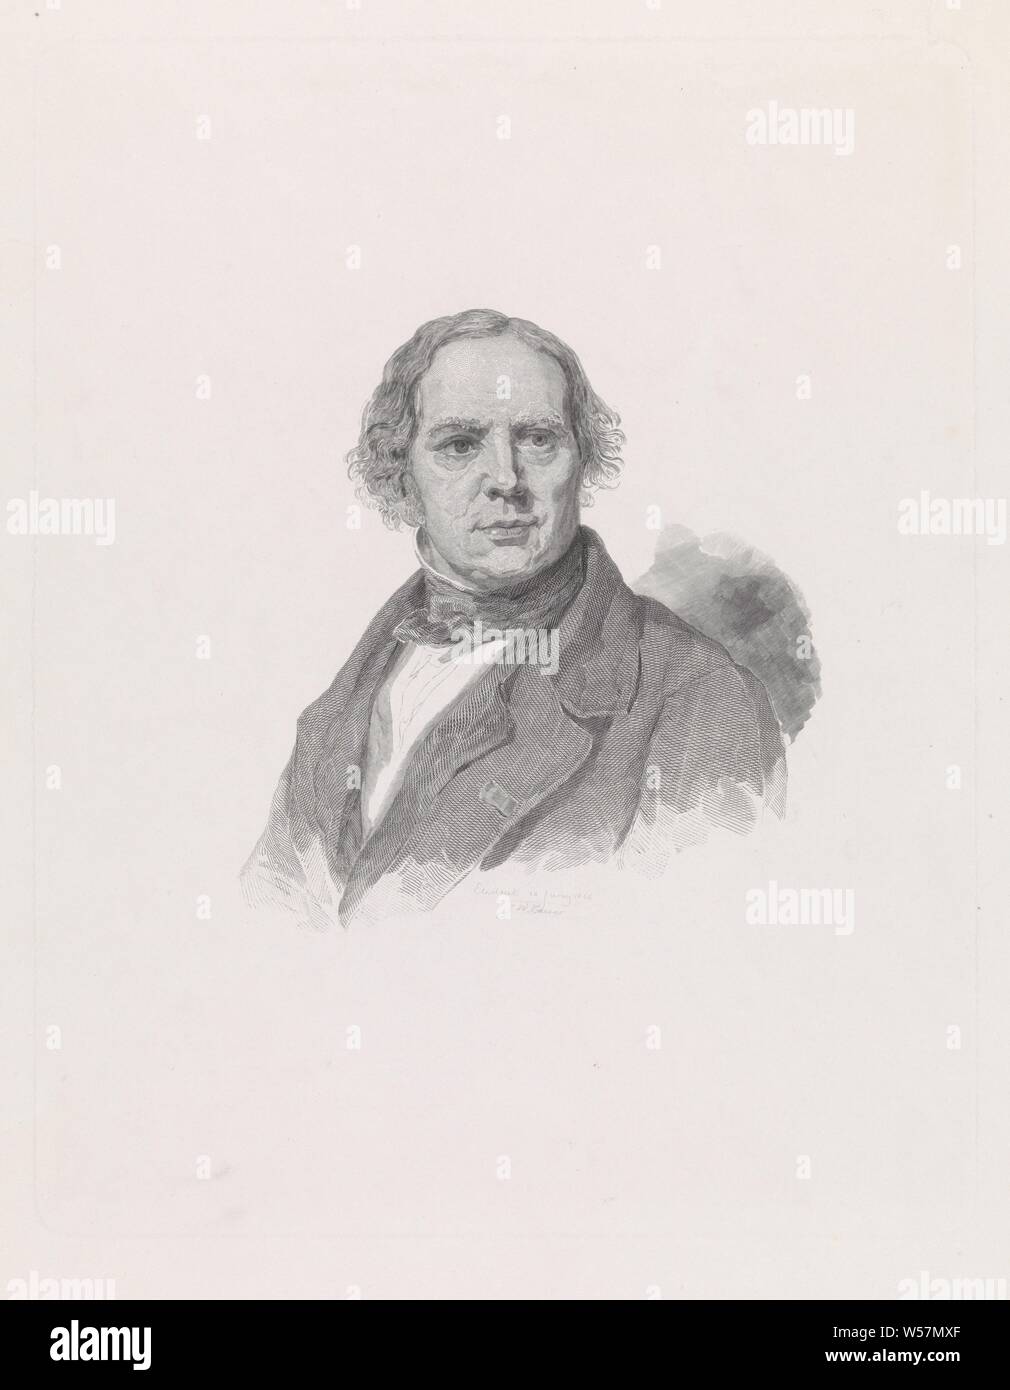 Portrait of Jan Willem Pieneman, Portrait bust to the left of the visual artist Jan Willem Pieneman, Jan Willem Pieneman, Johann Wilhelm Kaiser (I) (mentioned on object), 1846, paper, etching, h 350 mm × w 274 mm Stock Photo